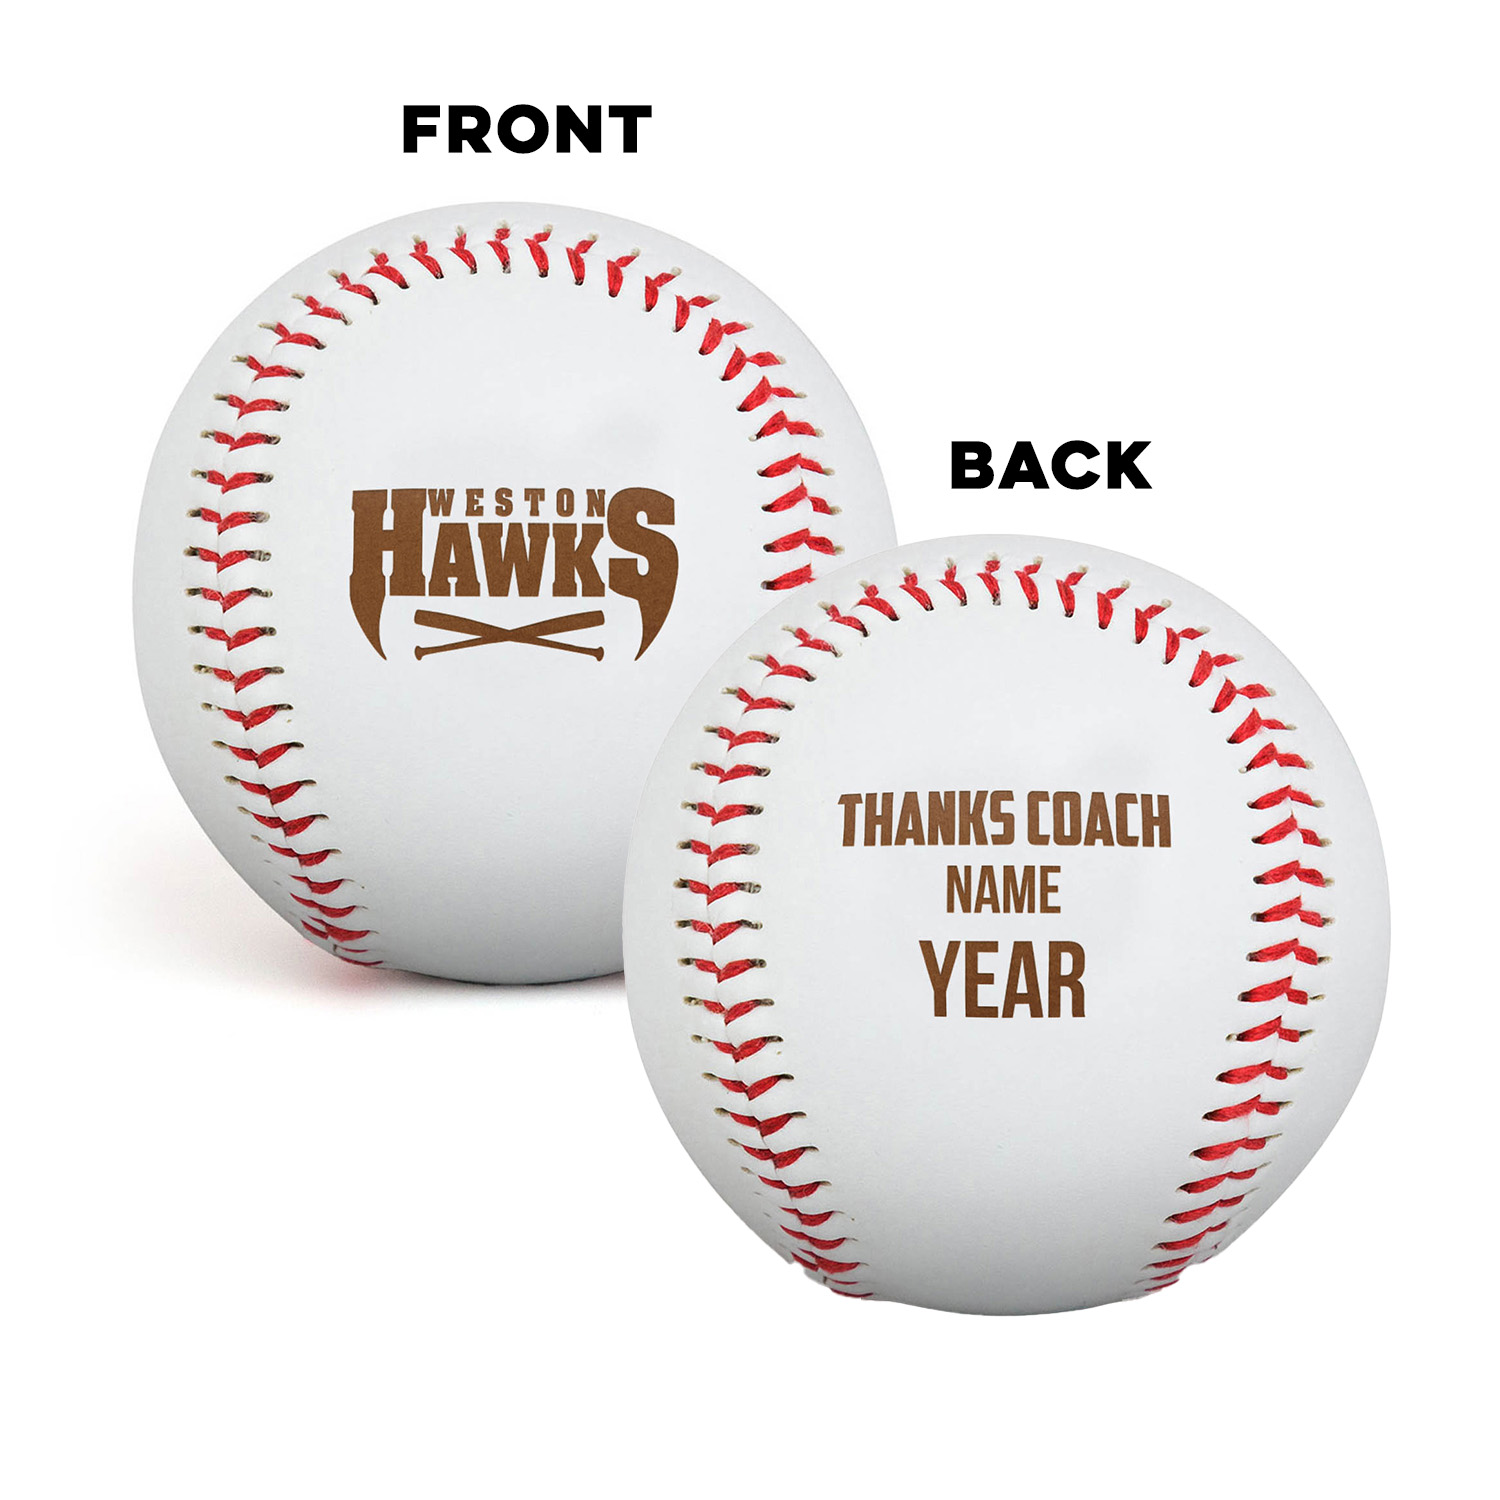 Engraved Baseball Front/Back - Thanks Coach with Team Logo - Personalization Image